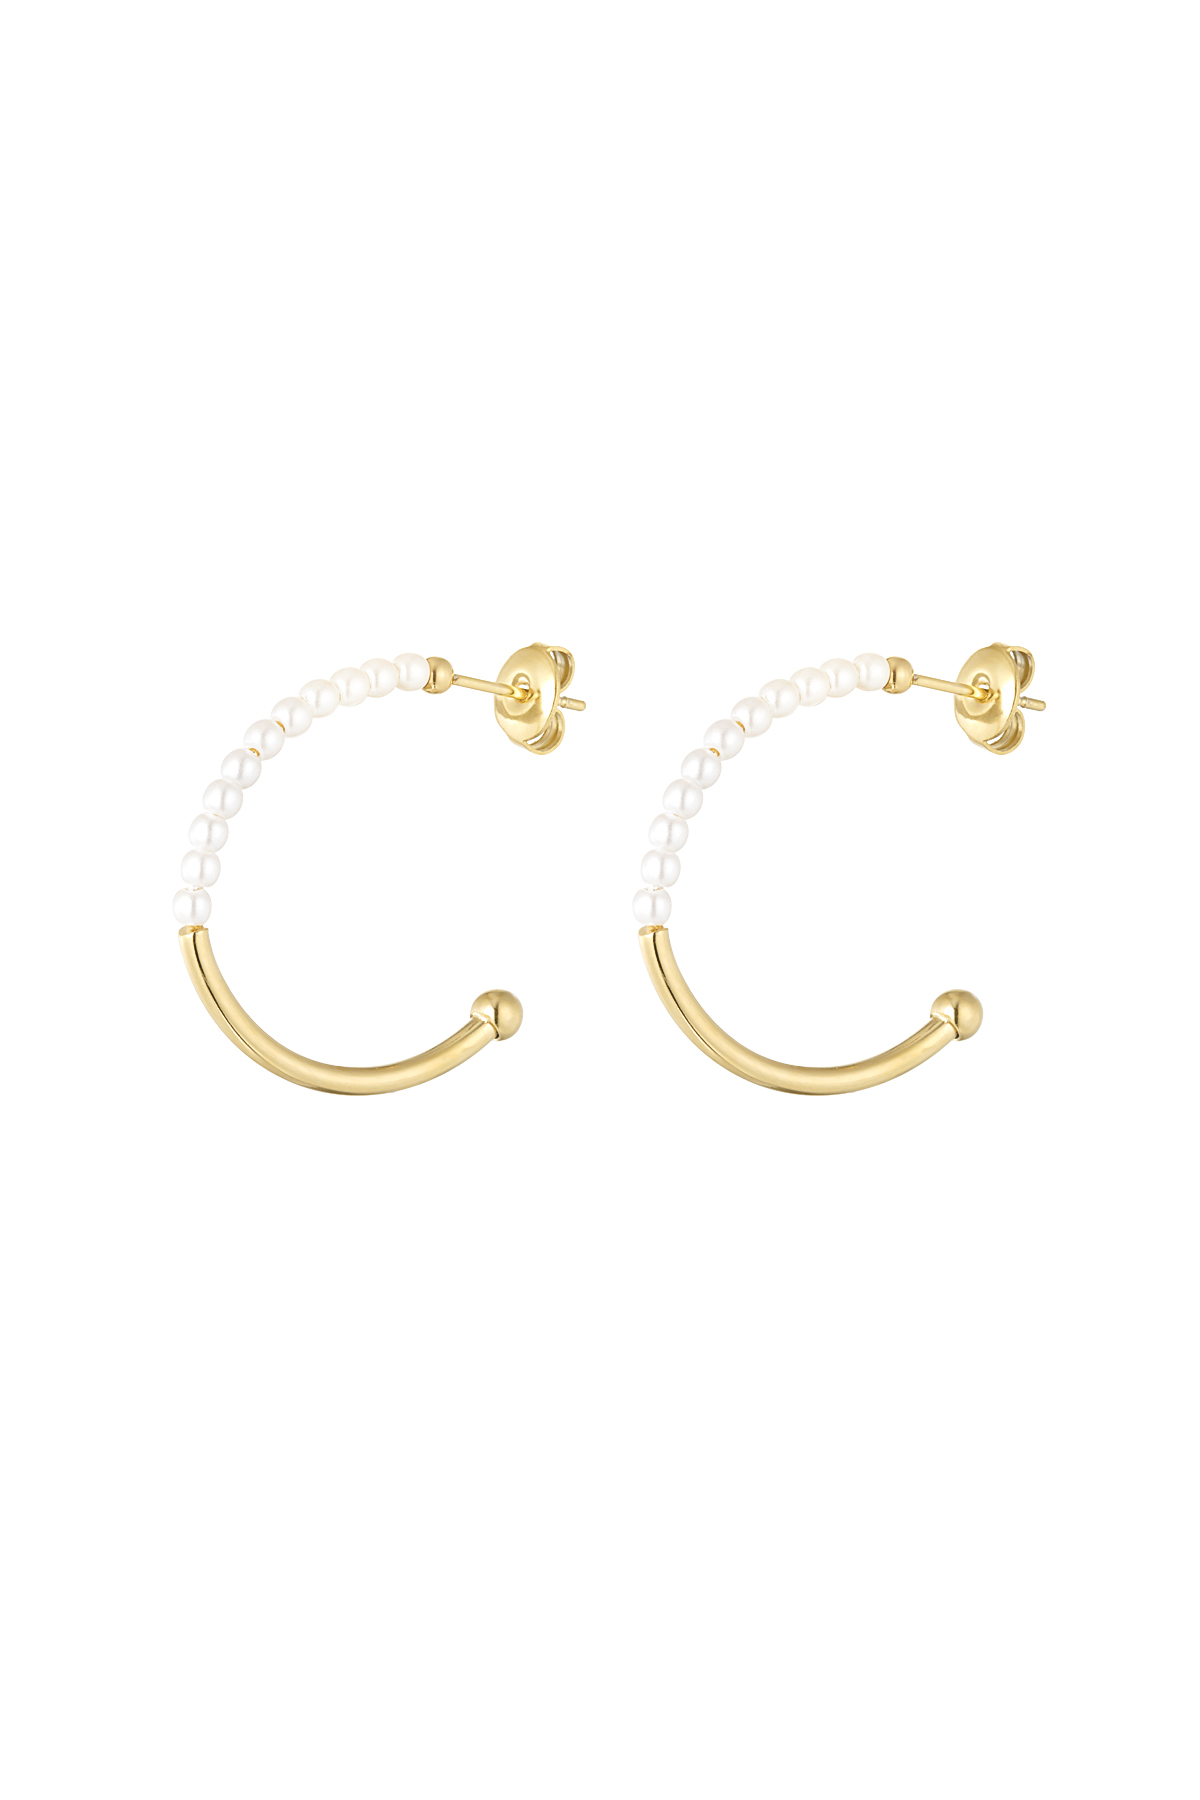 Round earrings half pearl - gold h5 